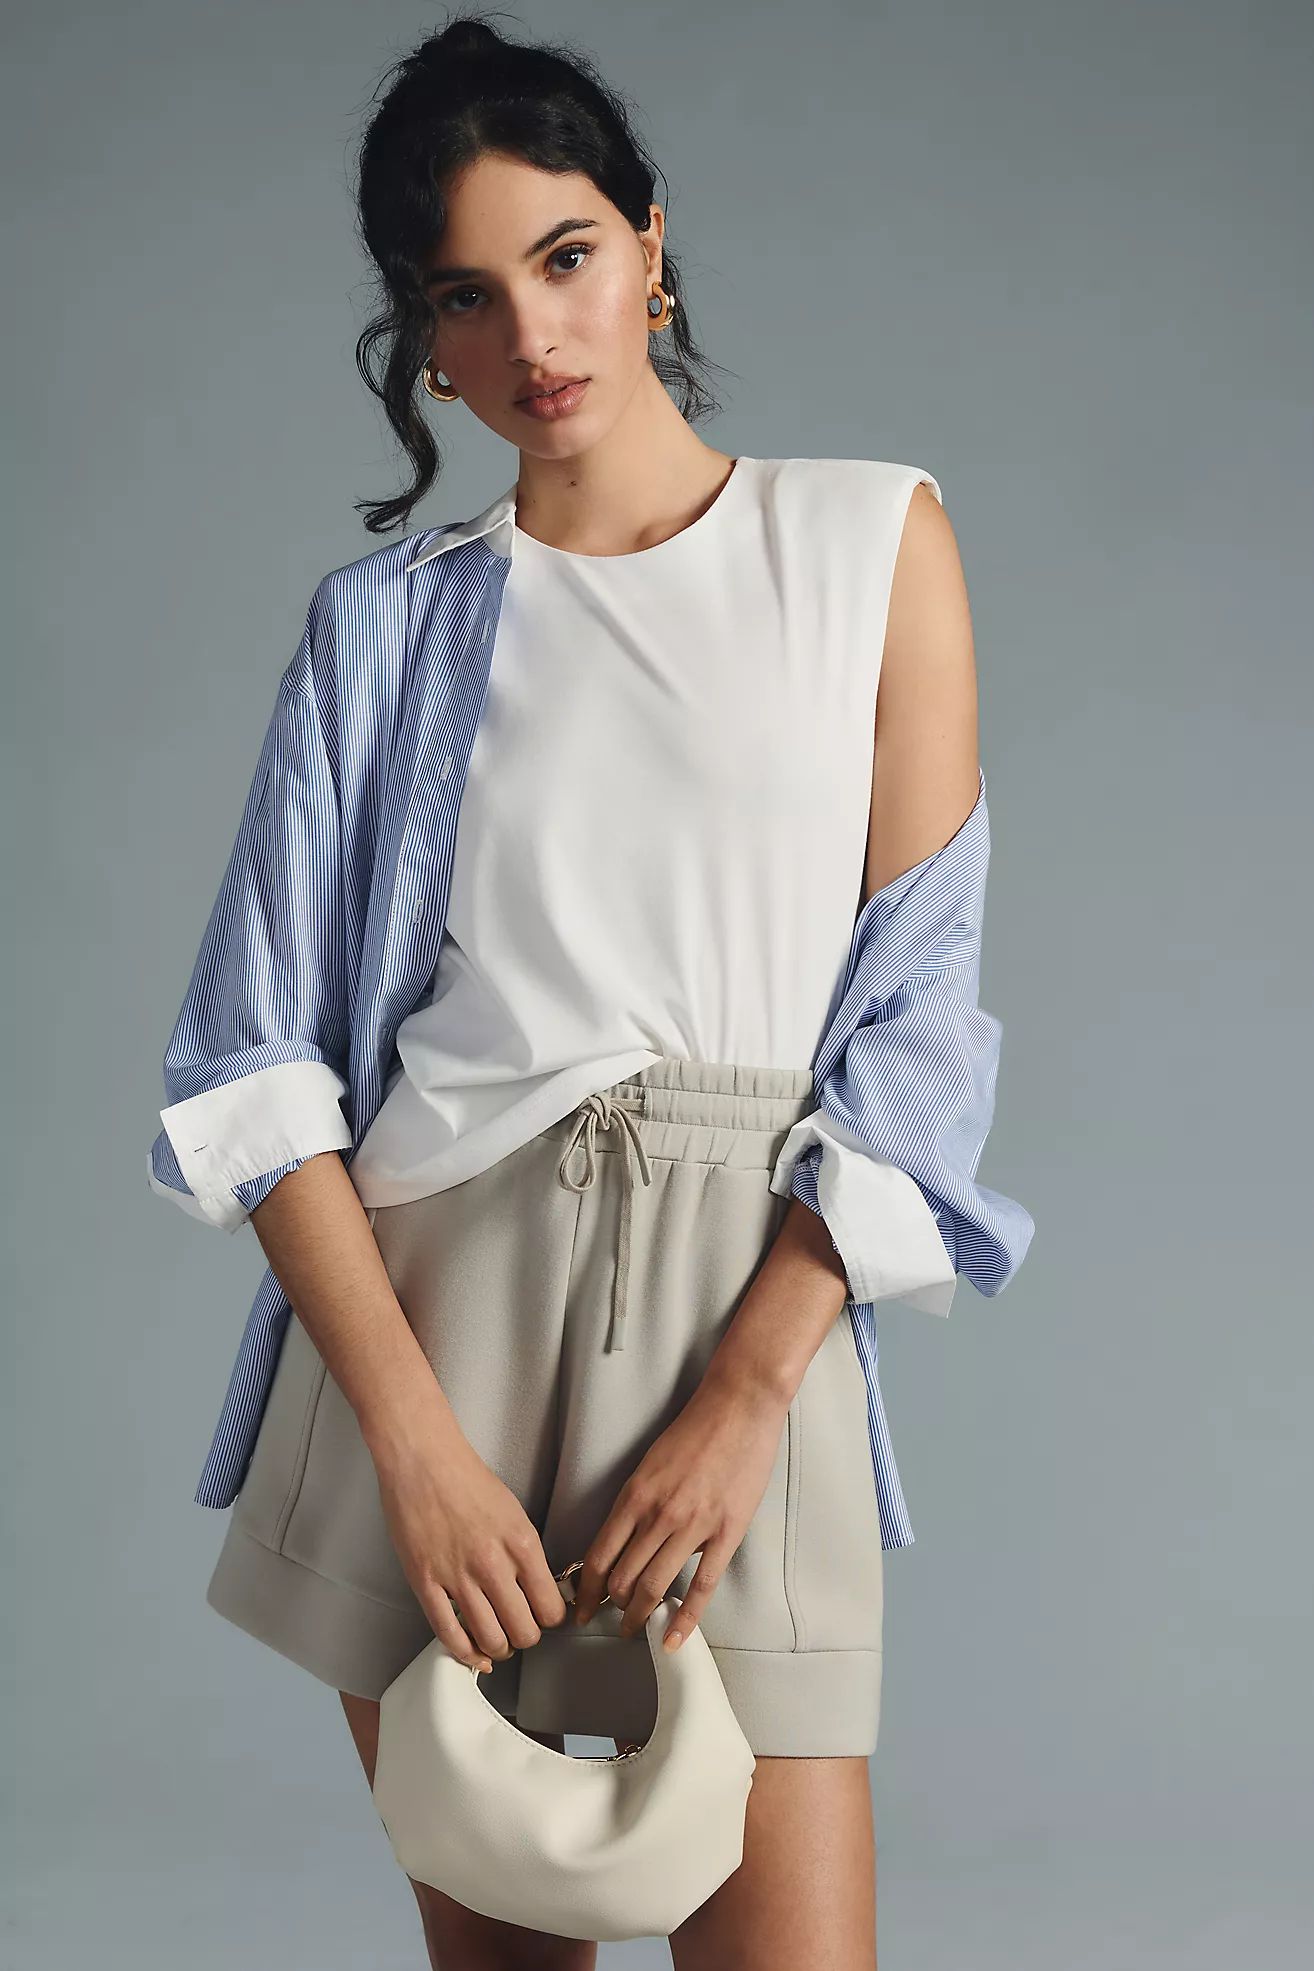 By Anthropologie Structured Sleeveless Top | Anthropologie (US)